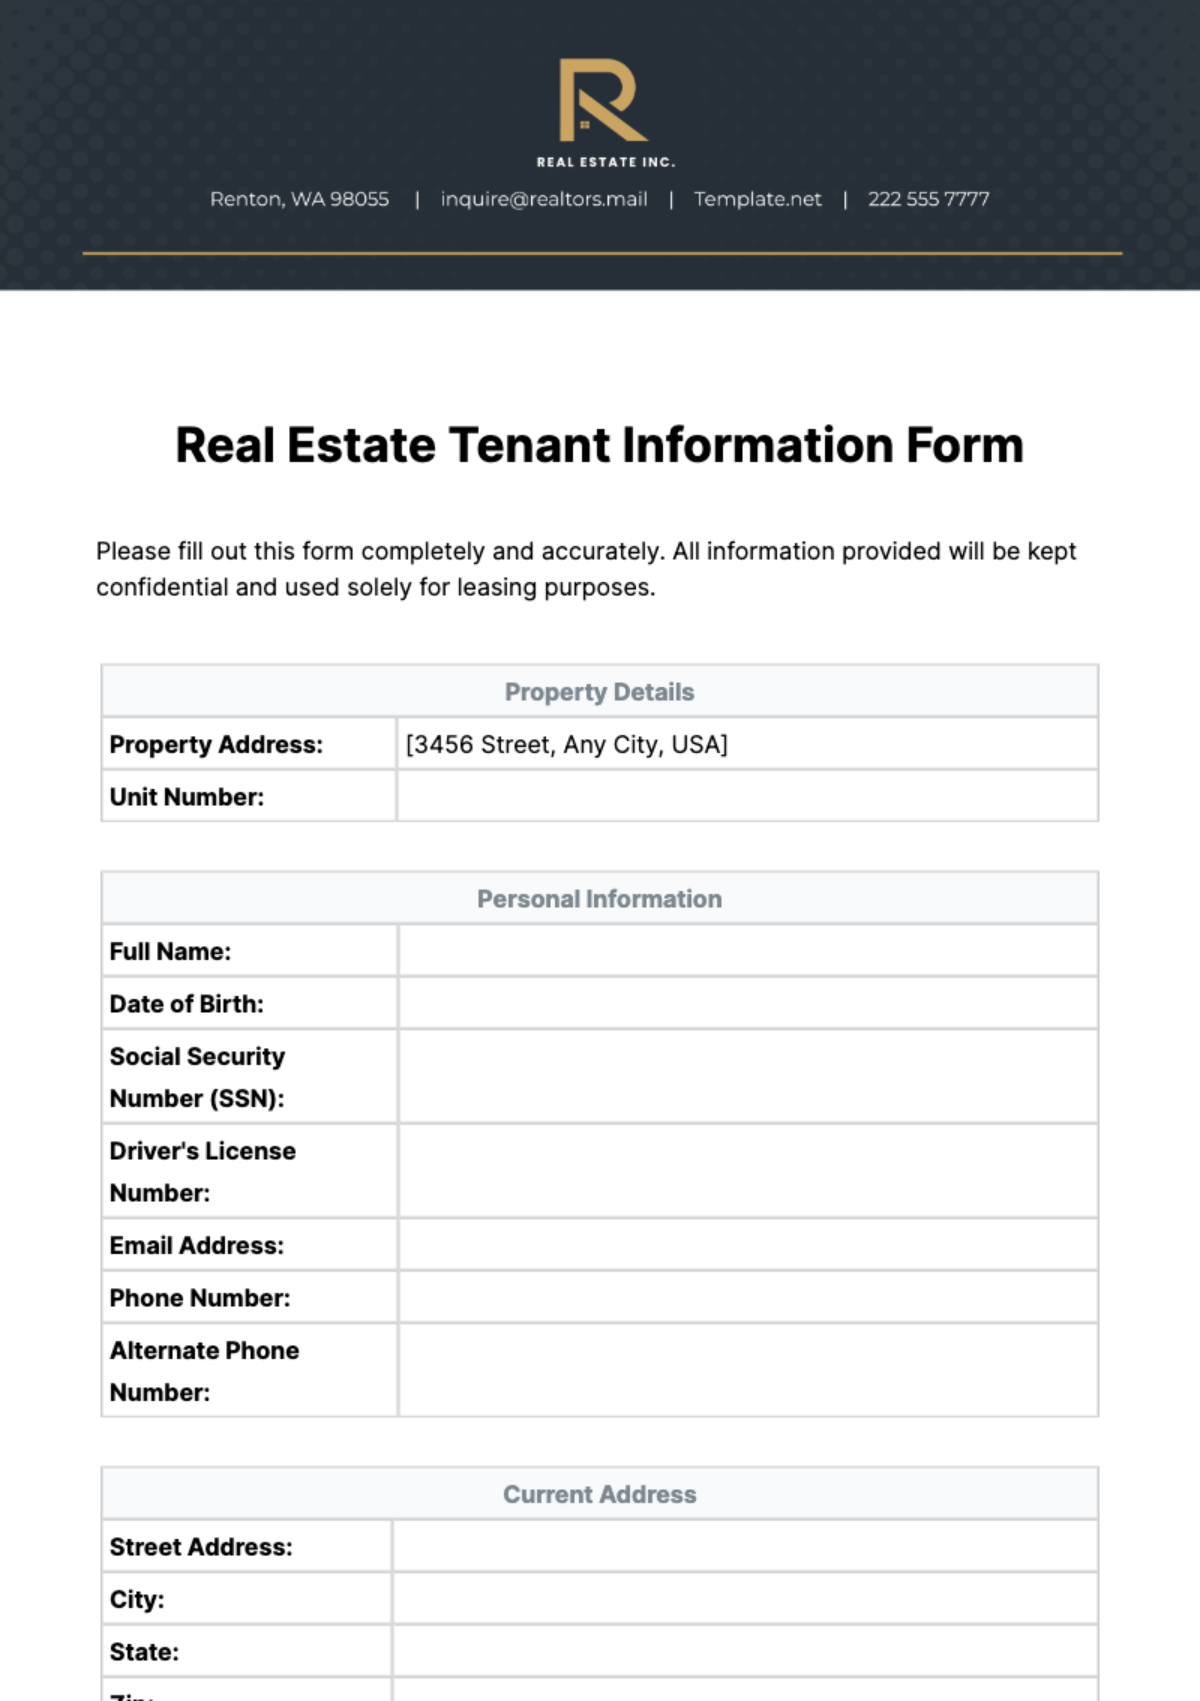 Real Estate Tenant Information Form Template